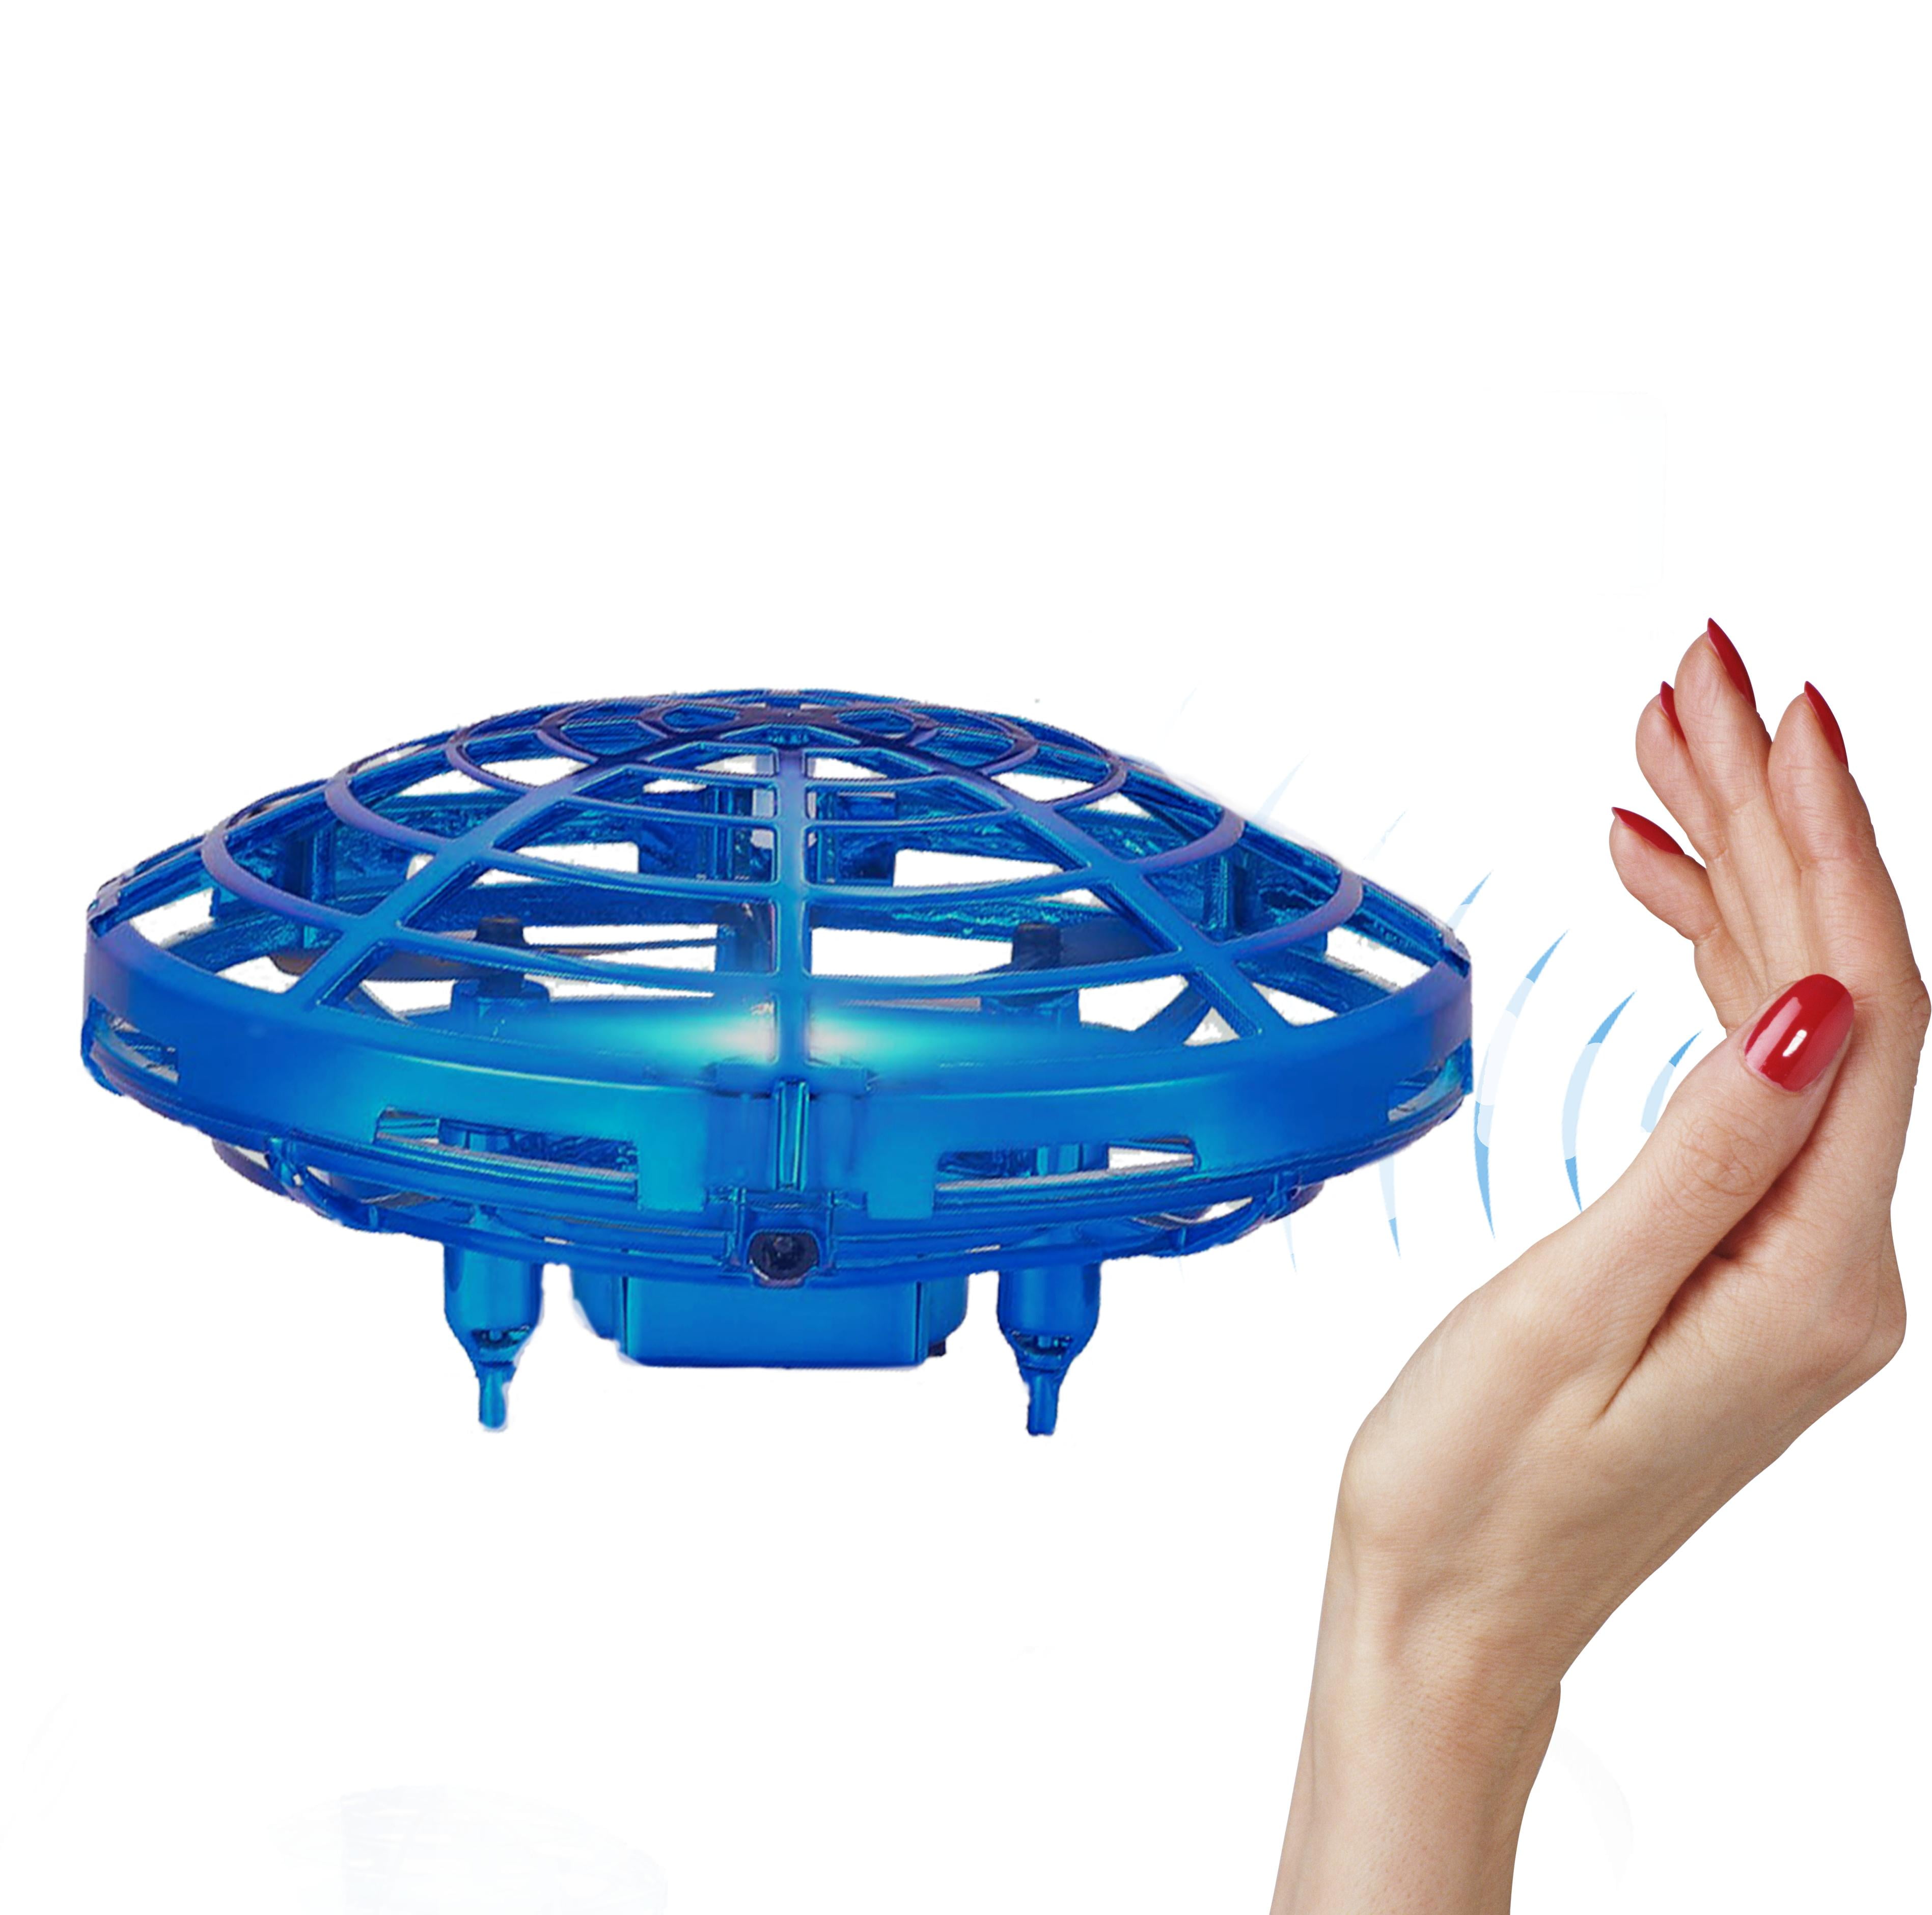 360 Spin Drone Smart UFO Aircraft Kid Flying Girl Boy Toy RC Hand Control Gestur 